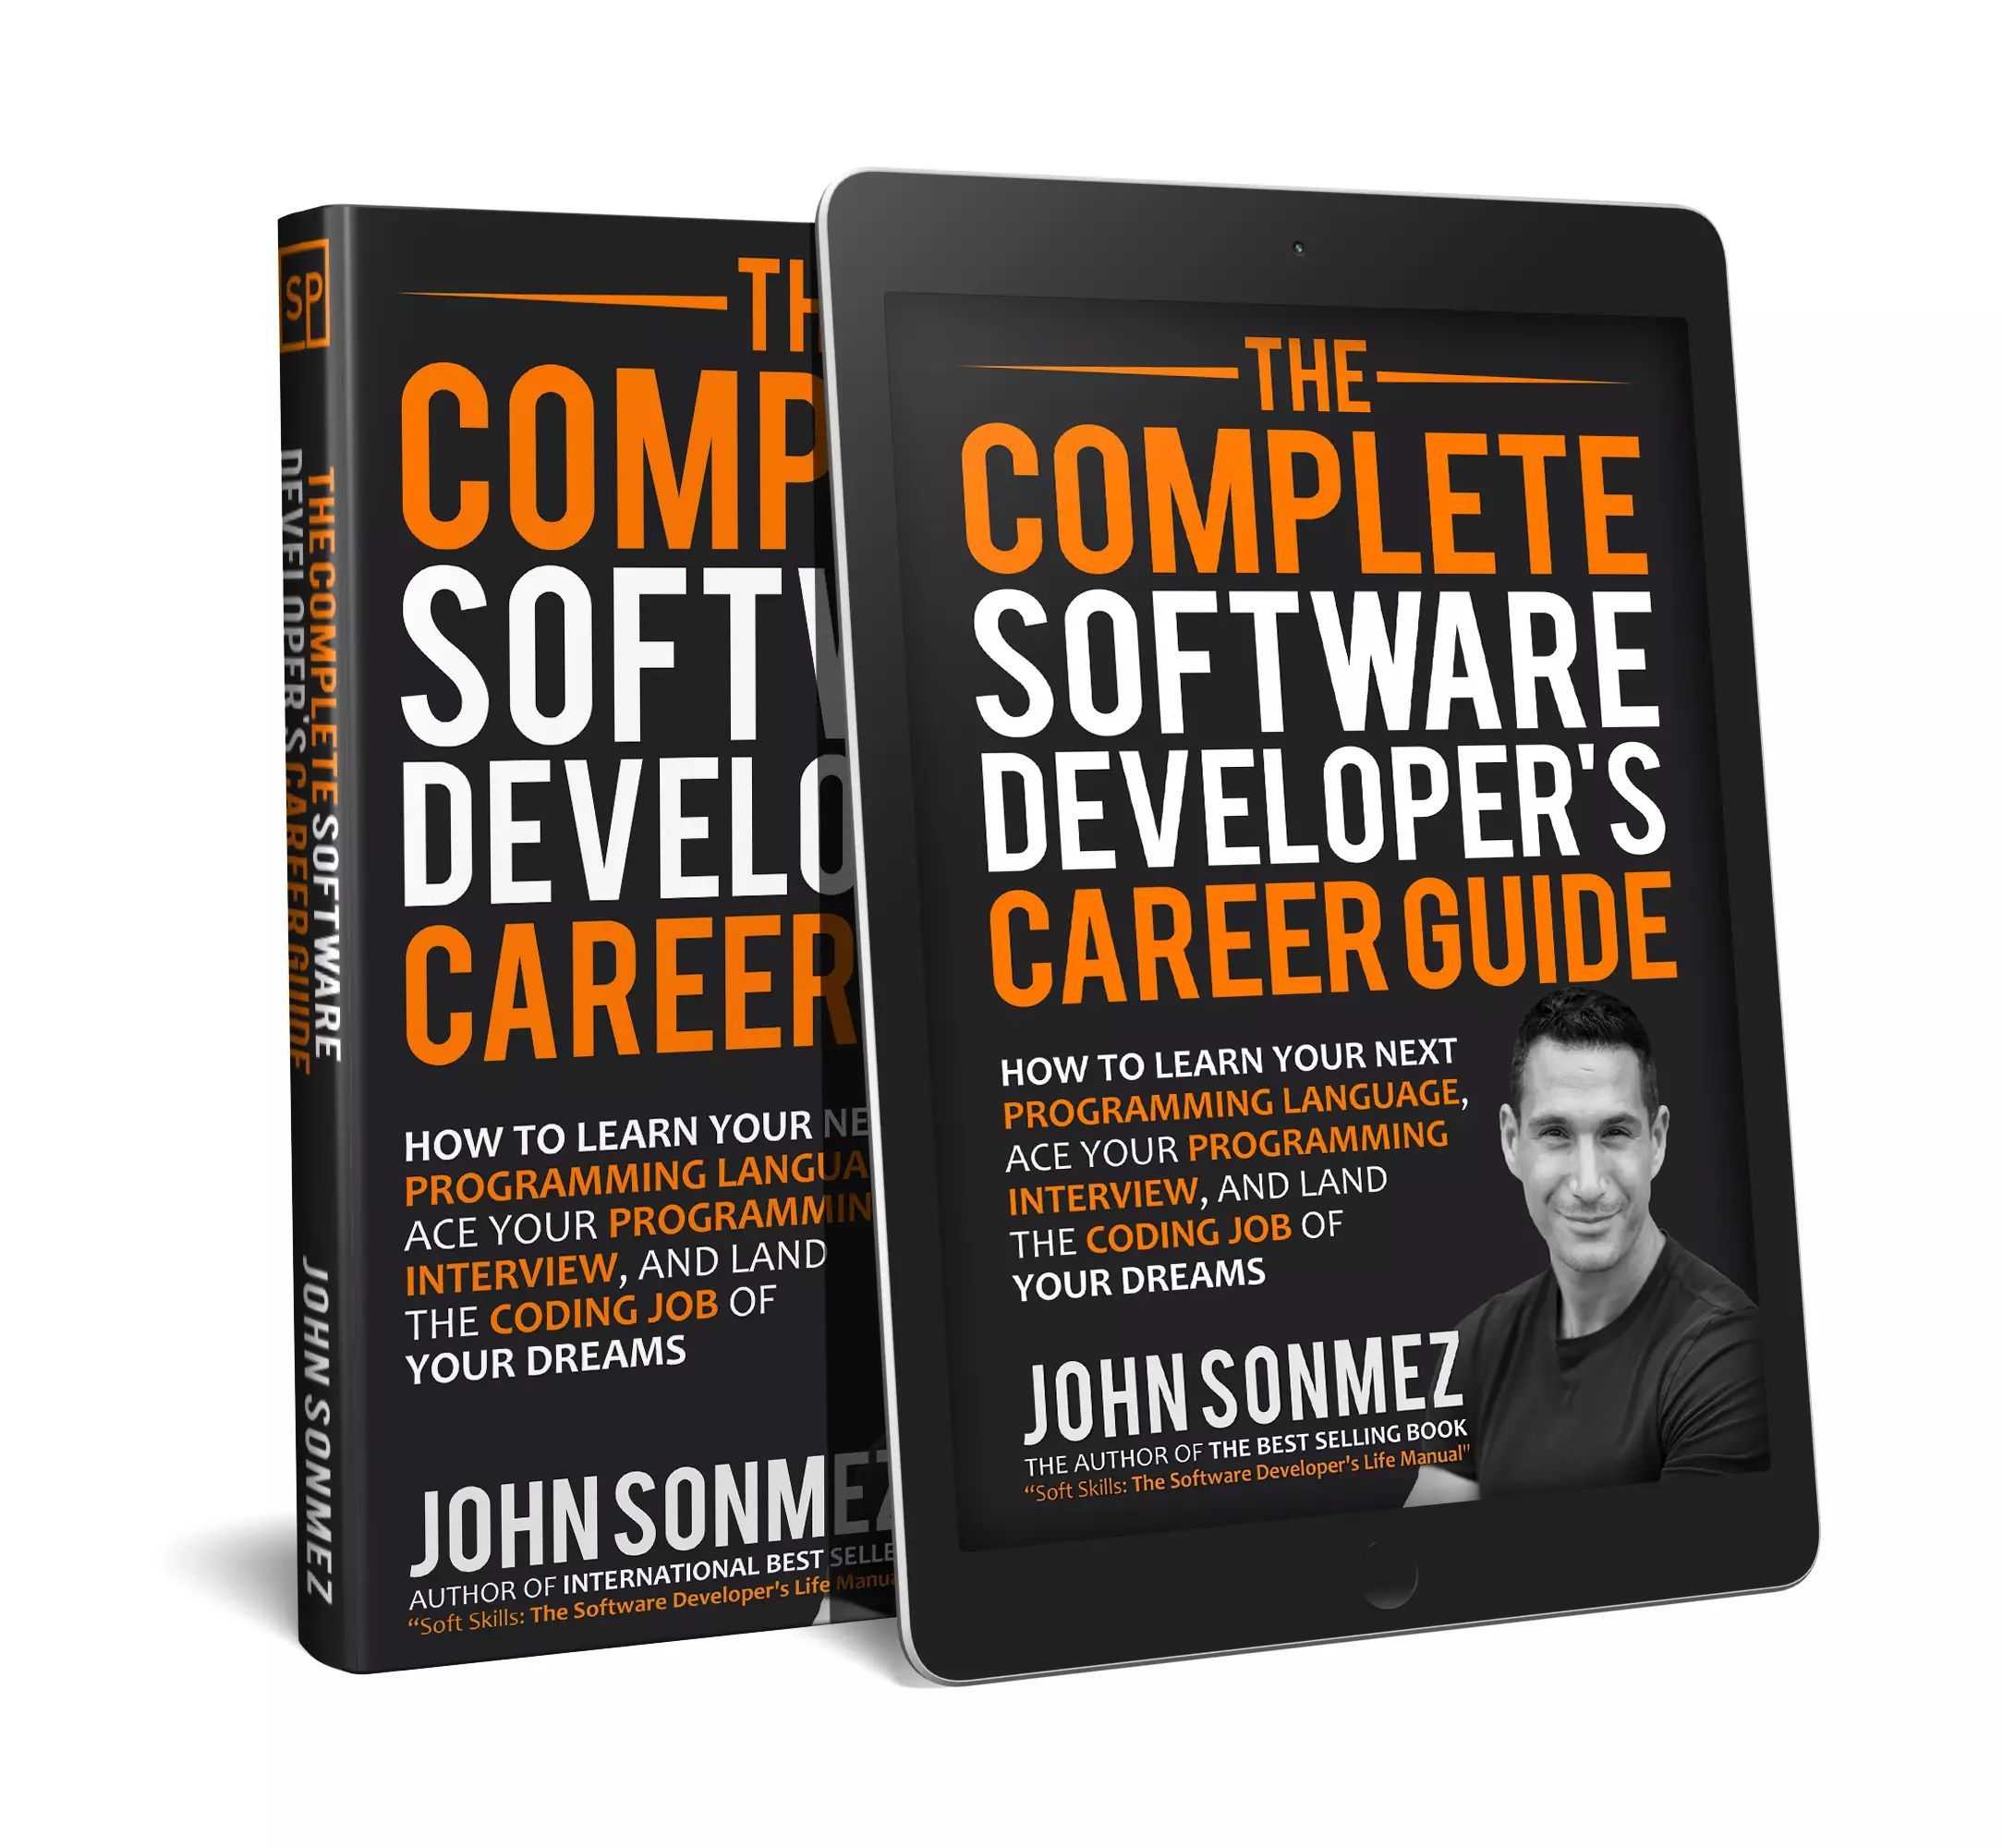 Book Review: The Complete Software Developer’s Career Guide